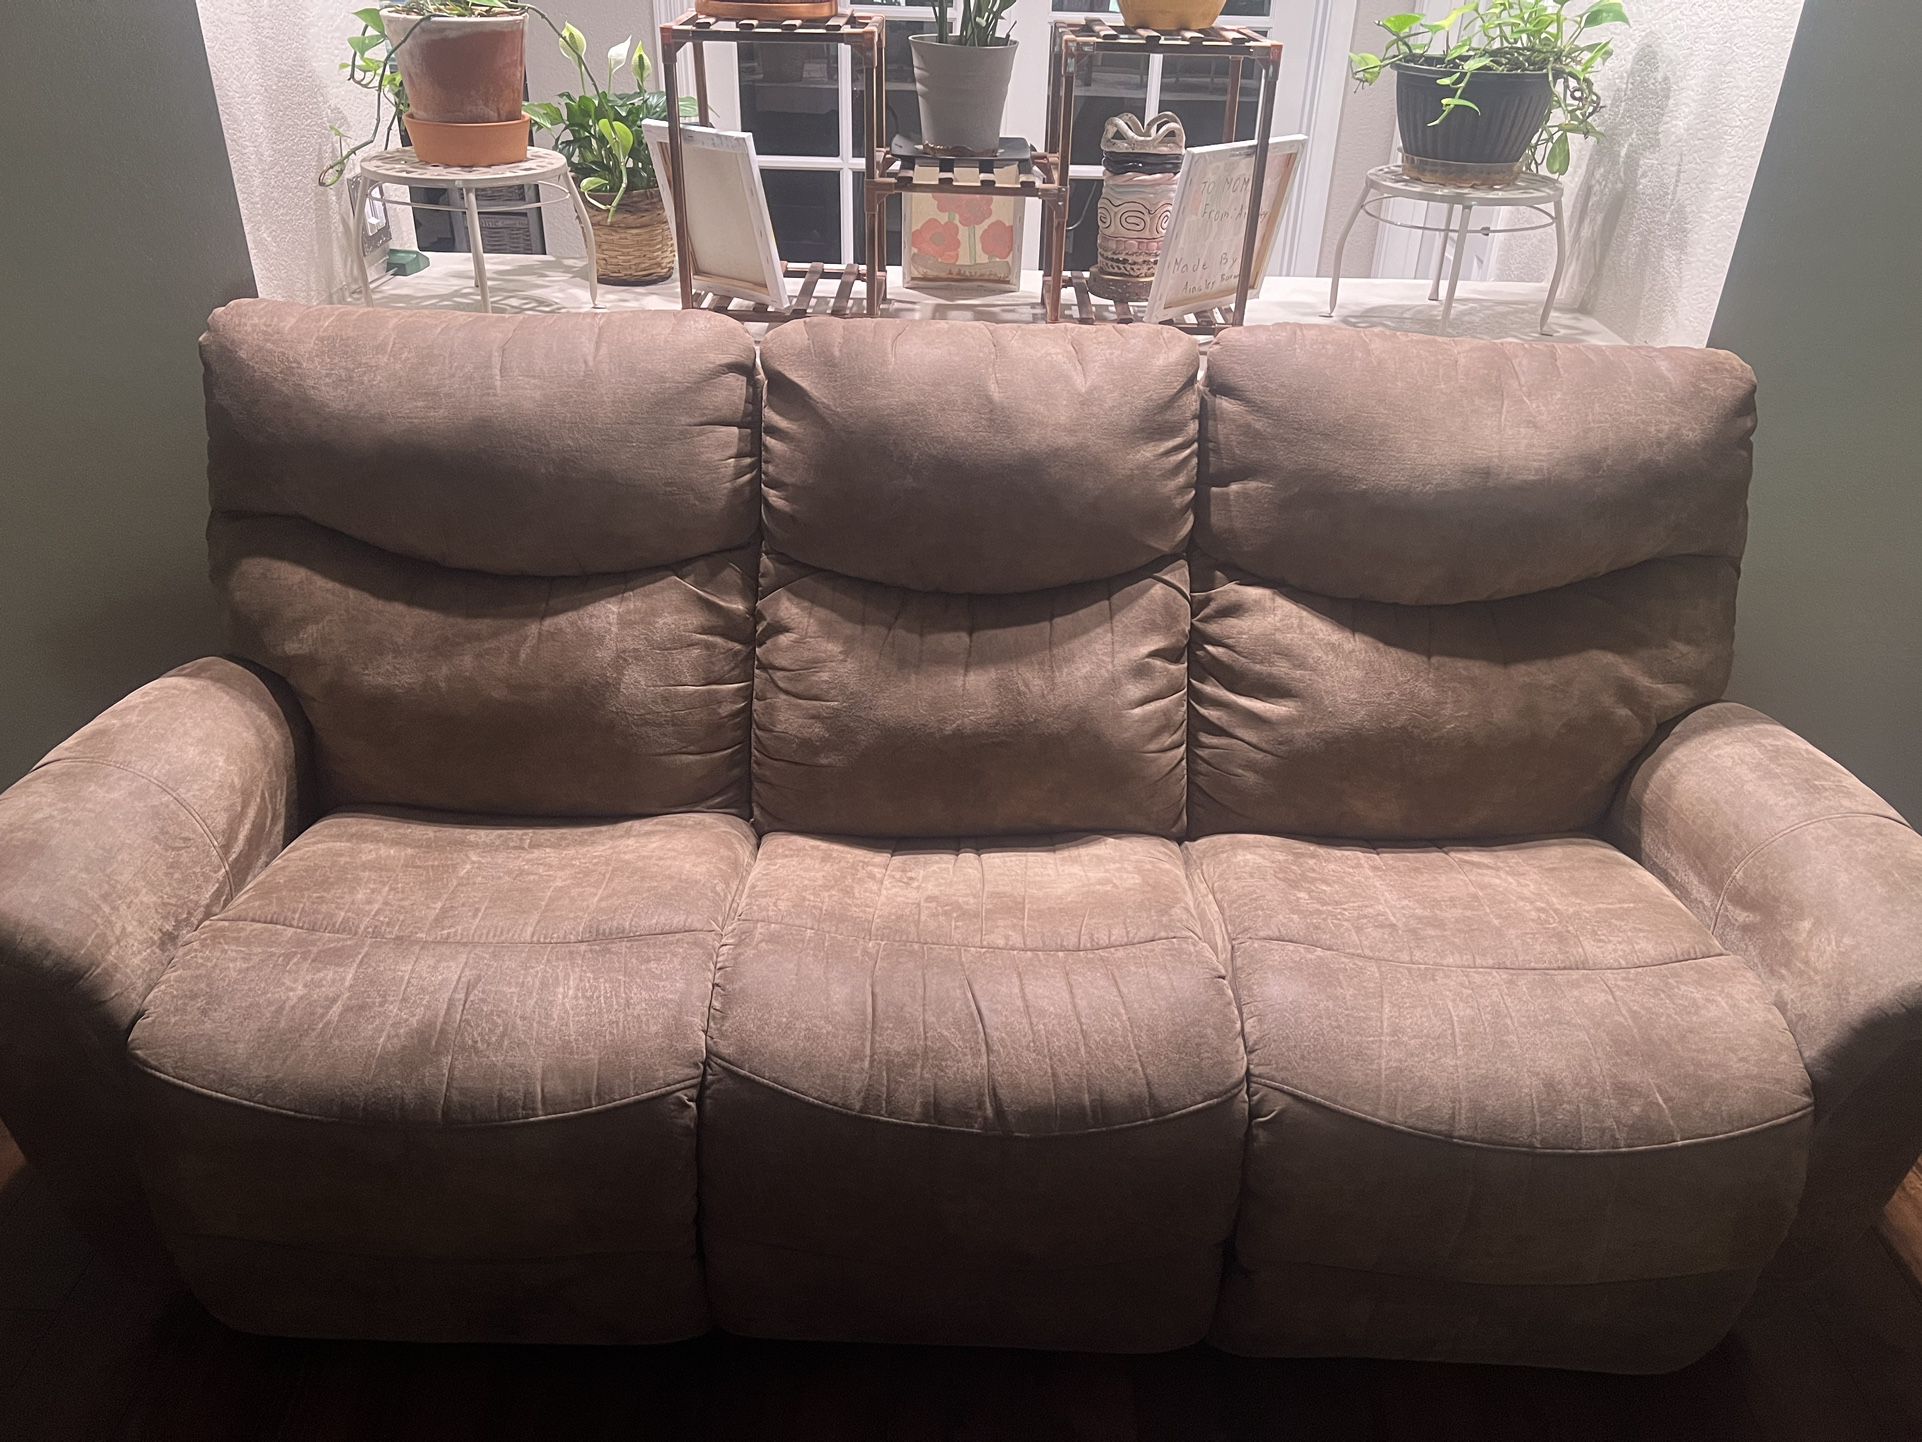 La-Z-Boy Couch And Recliner 